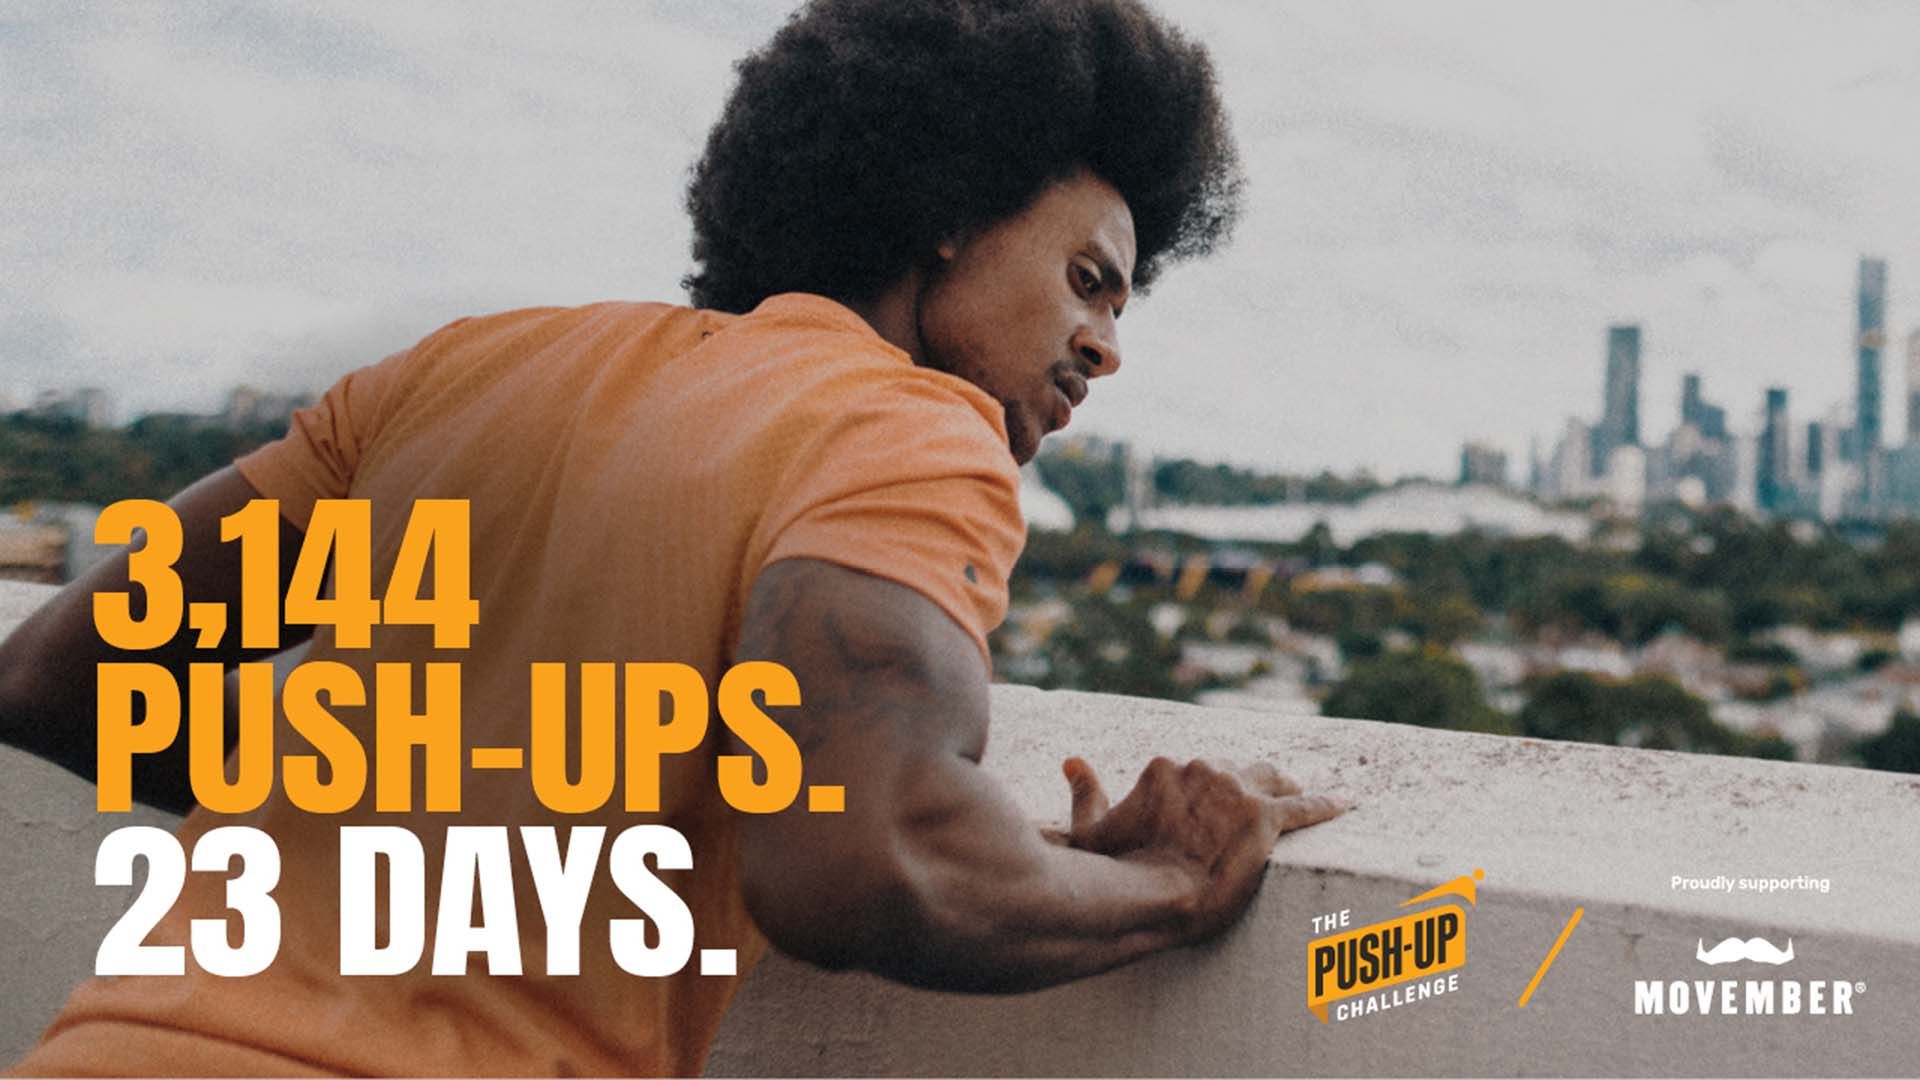 Athletic man performing push-ups against a ledge. Superimposed text reads: "3,144 push-ups. 23 days."